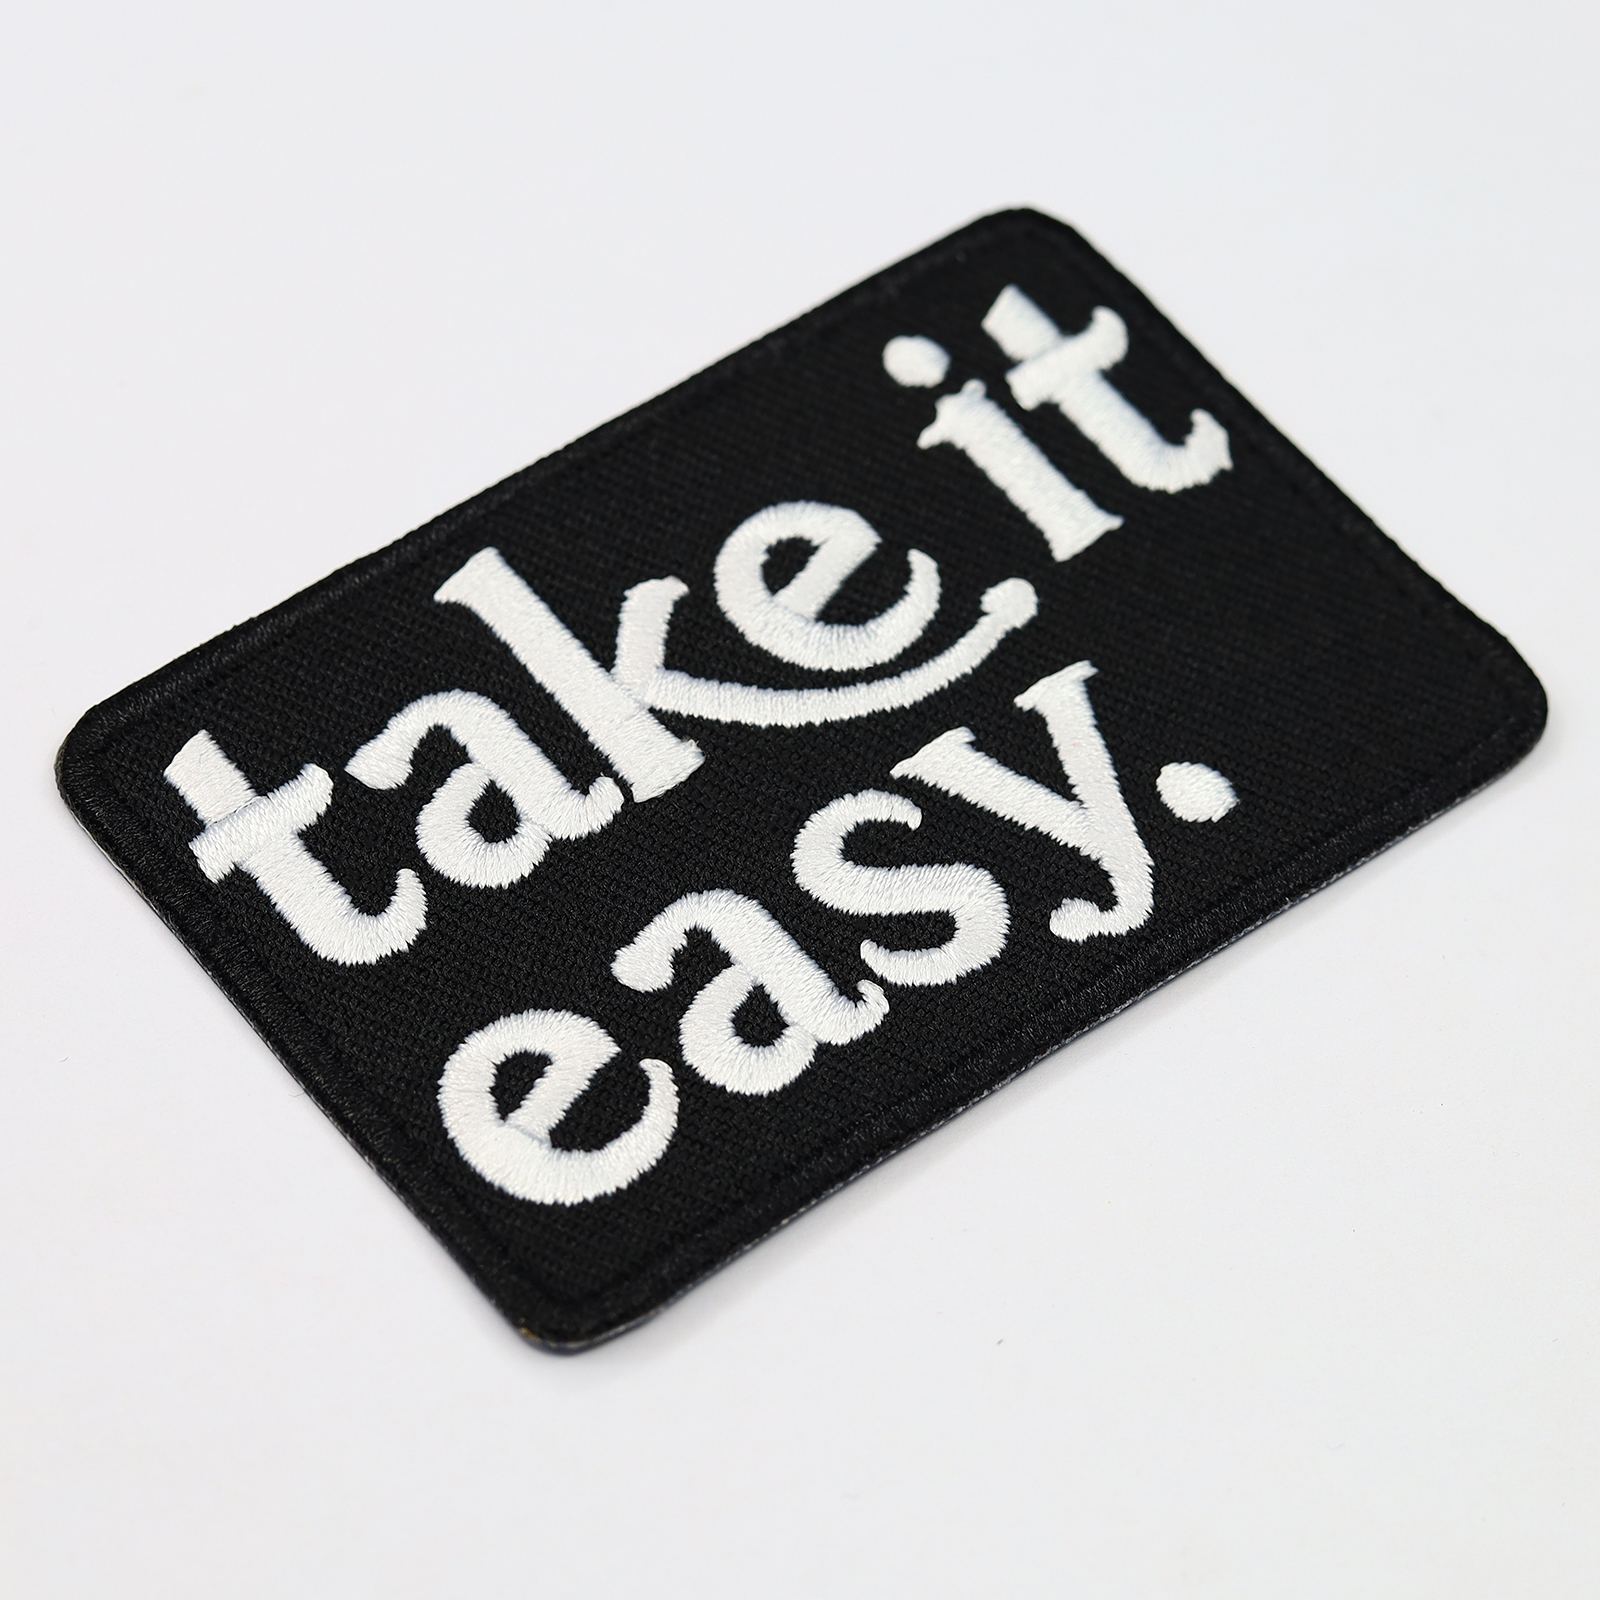 Take it easy. - Patch